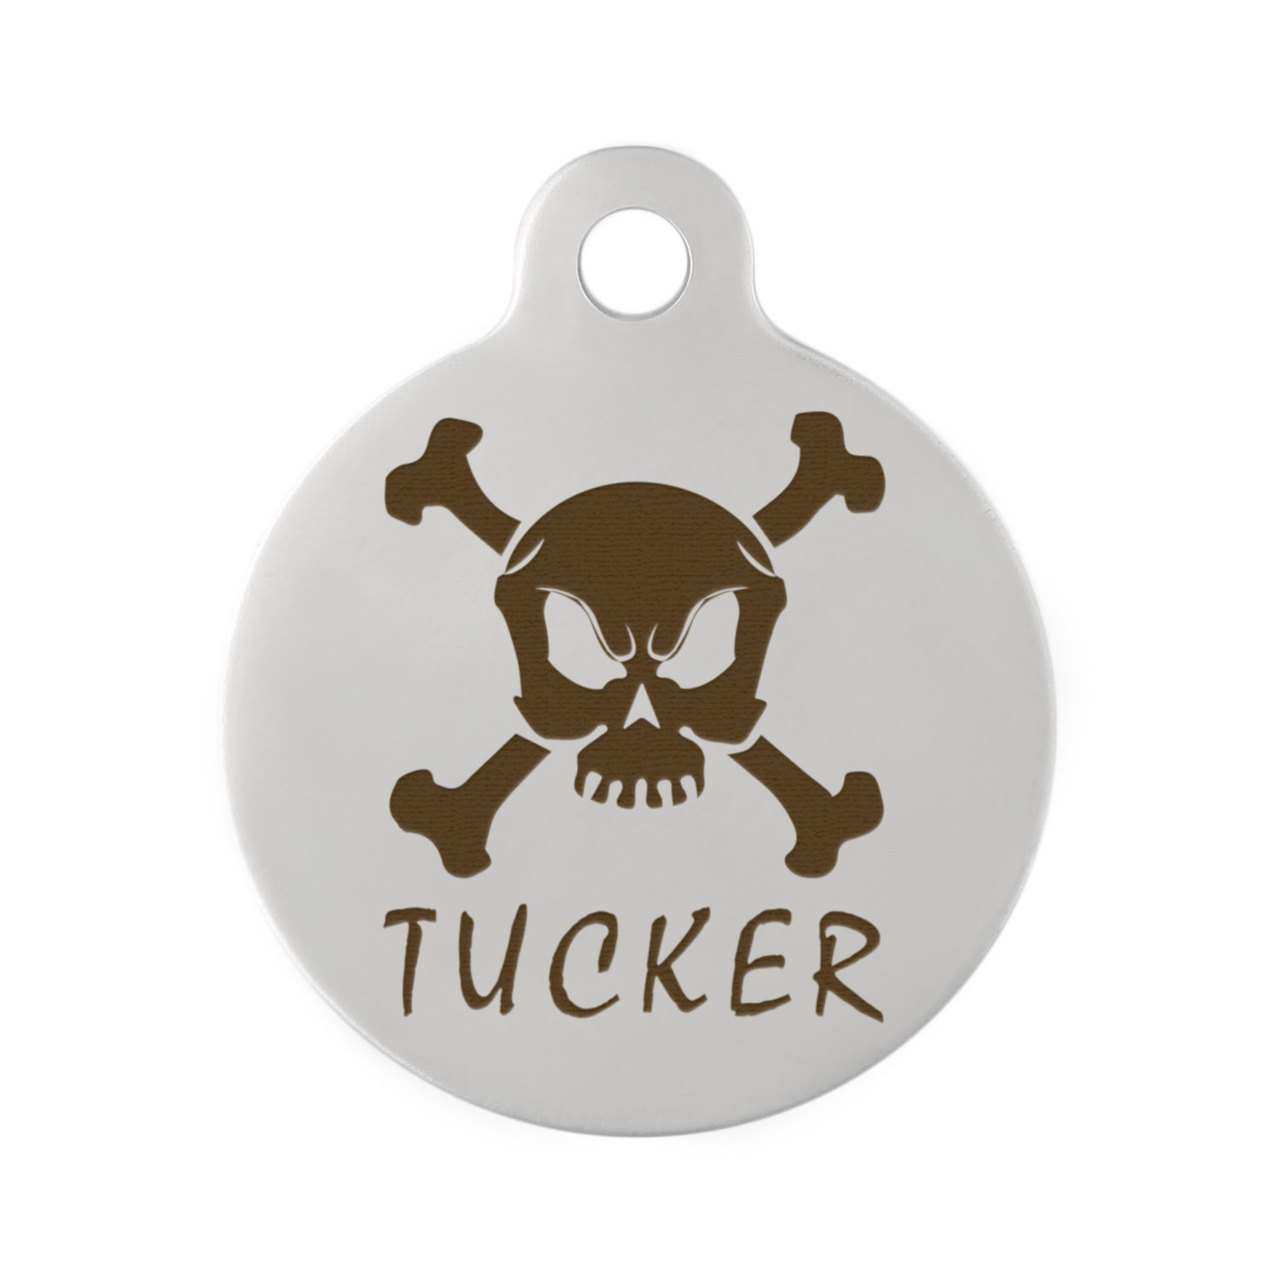 Skull Design Dog ID Tags - Scary Skull Stainless Steel